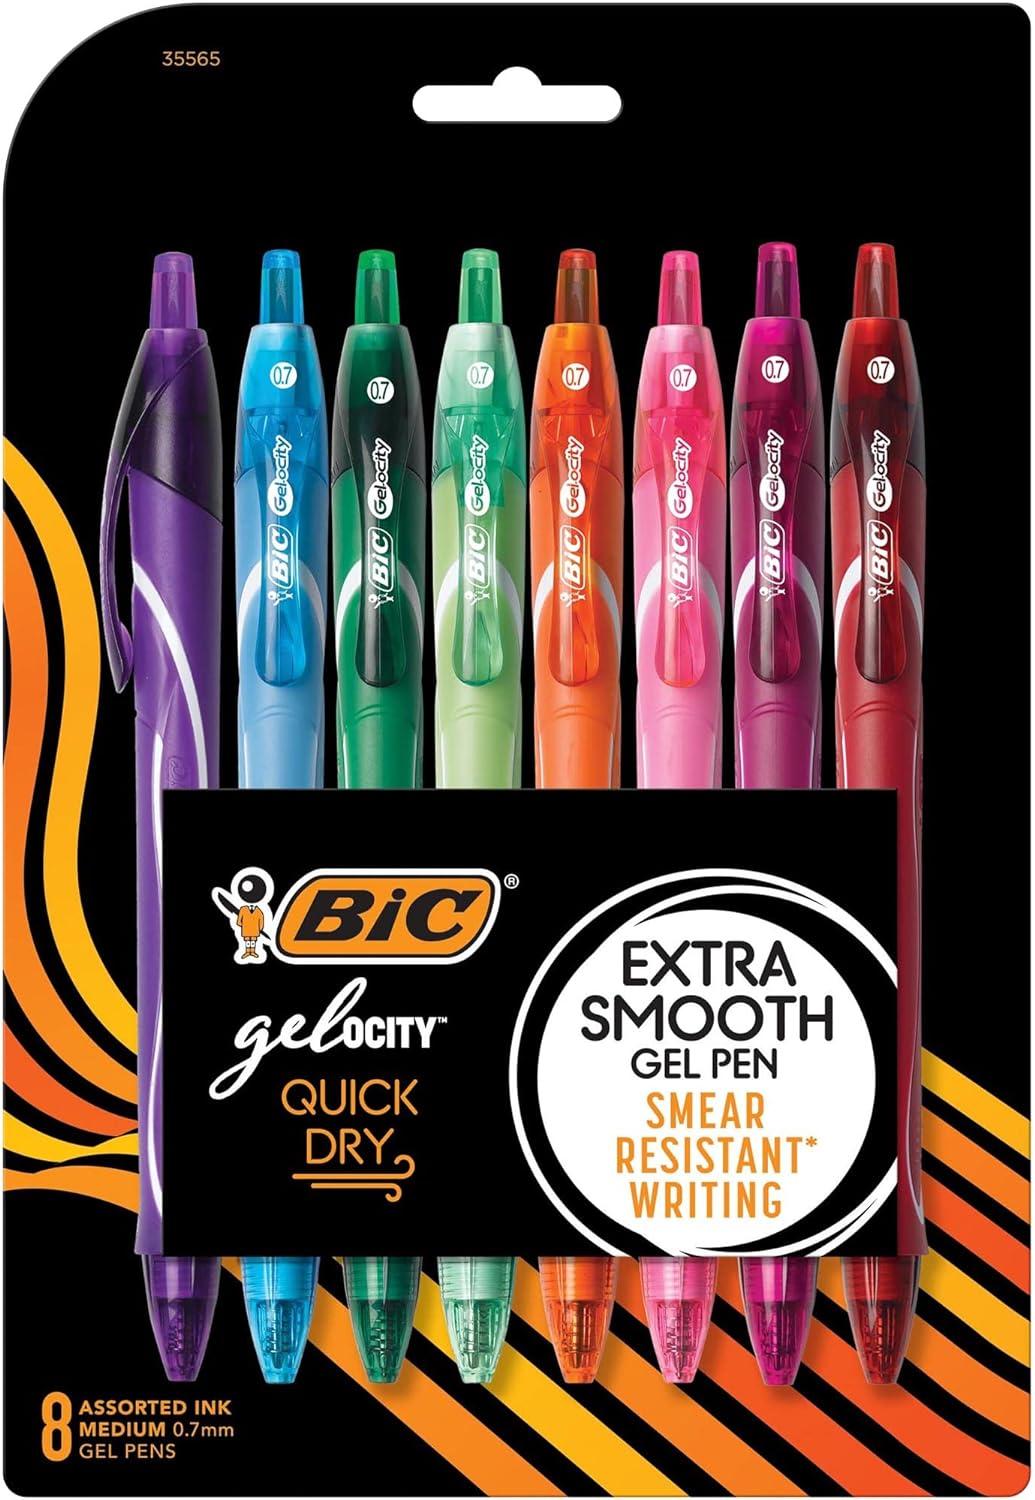 BIC Gel-ocity Quick Dry Special Edition Fashion Gel Pen Medium Point 0 7mm Assorted Colours